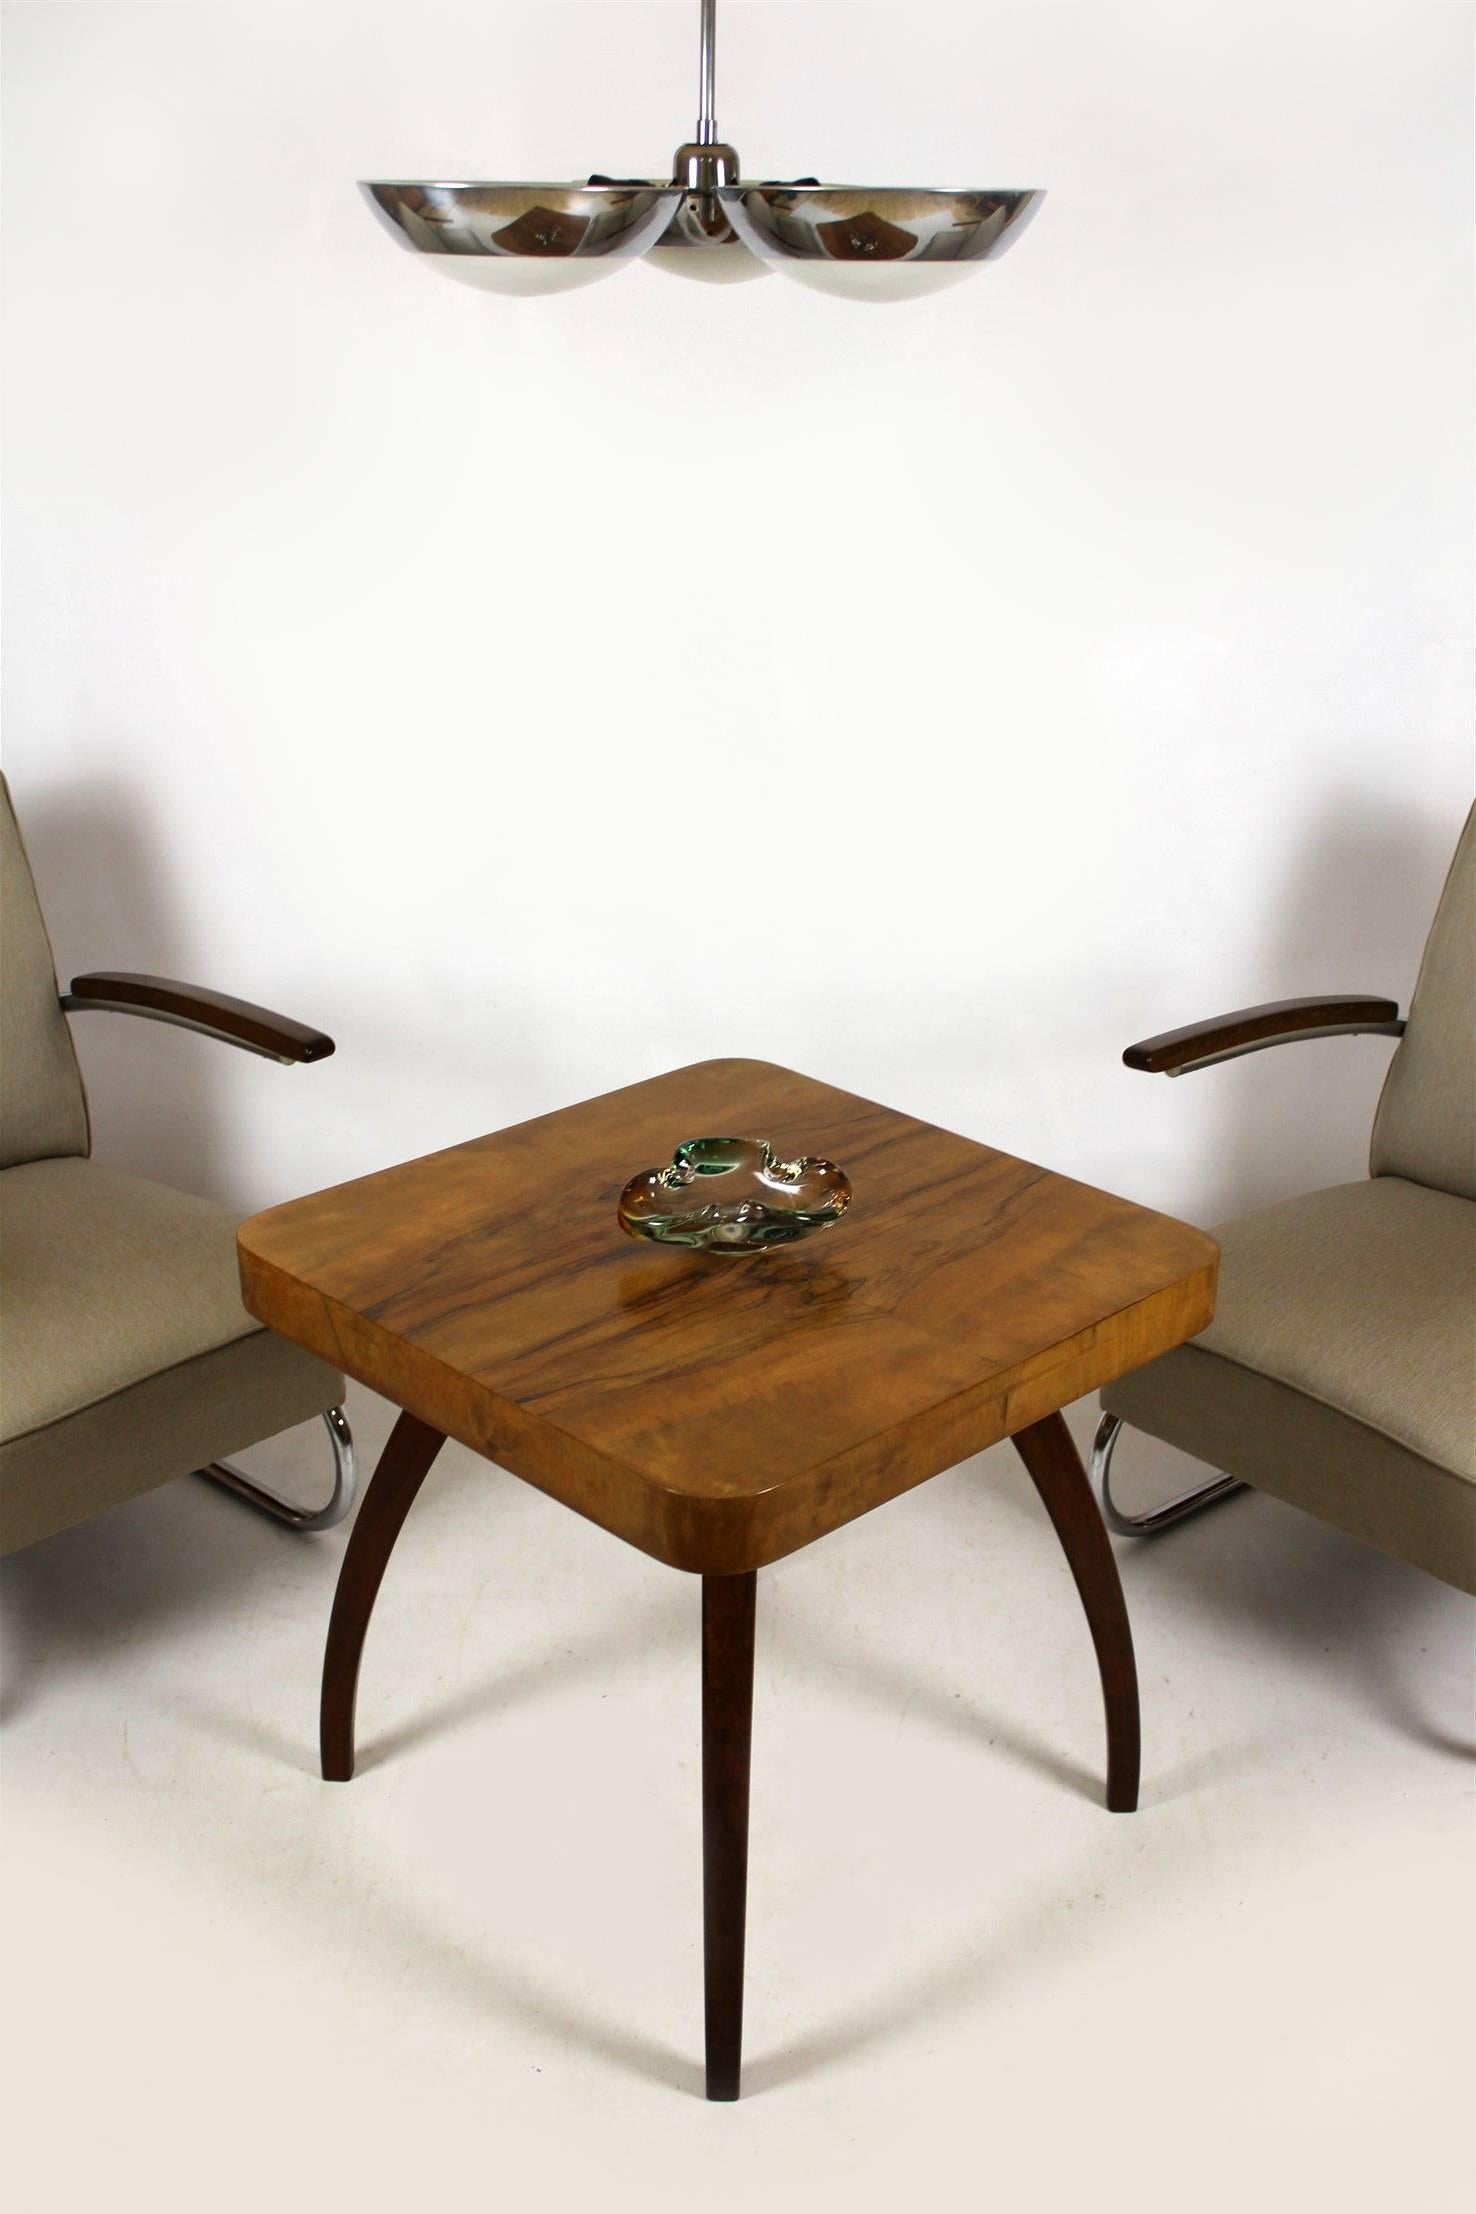 This coffee table, model H-259, was designed by Jindrich Halabala for UP Závody in the 1930s.
It features a walnut veneered top and legs made of bentwood. The table has been restored.